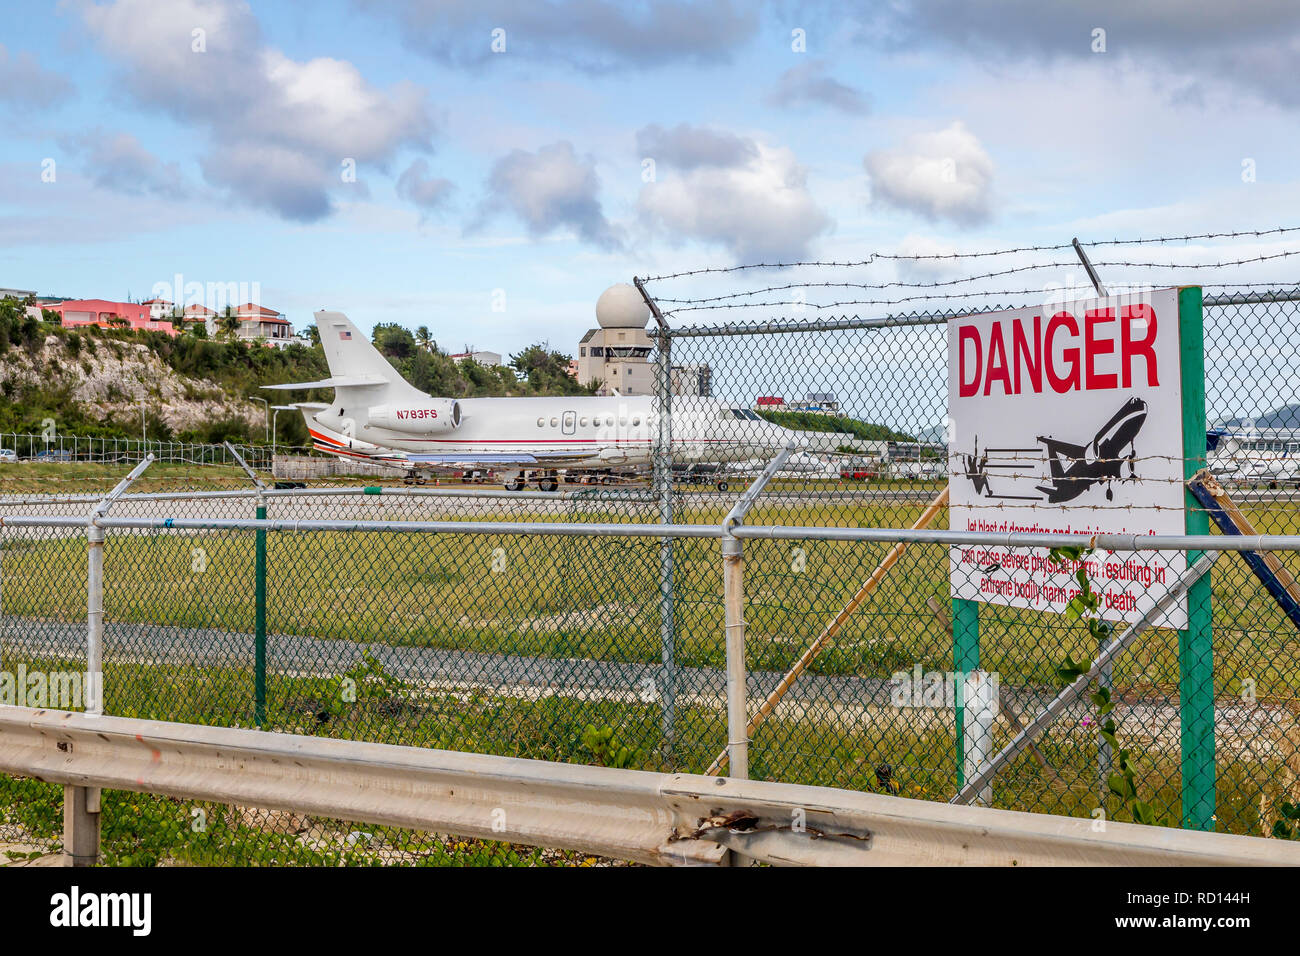 N783FS Private Dassault Falcon 2000 on the runway at Princess Juliana airport in St Marten. Stock Photo